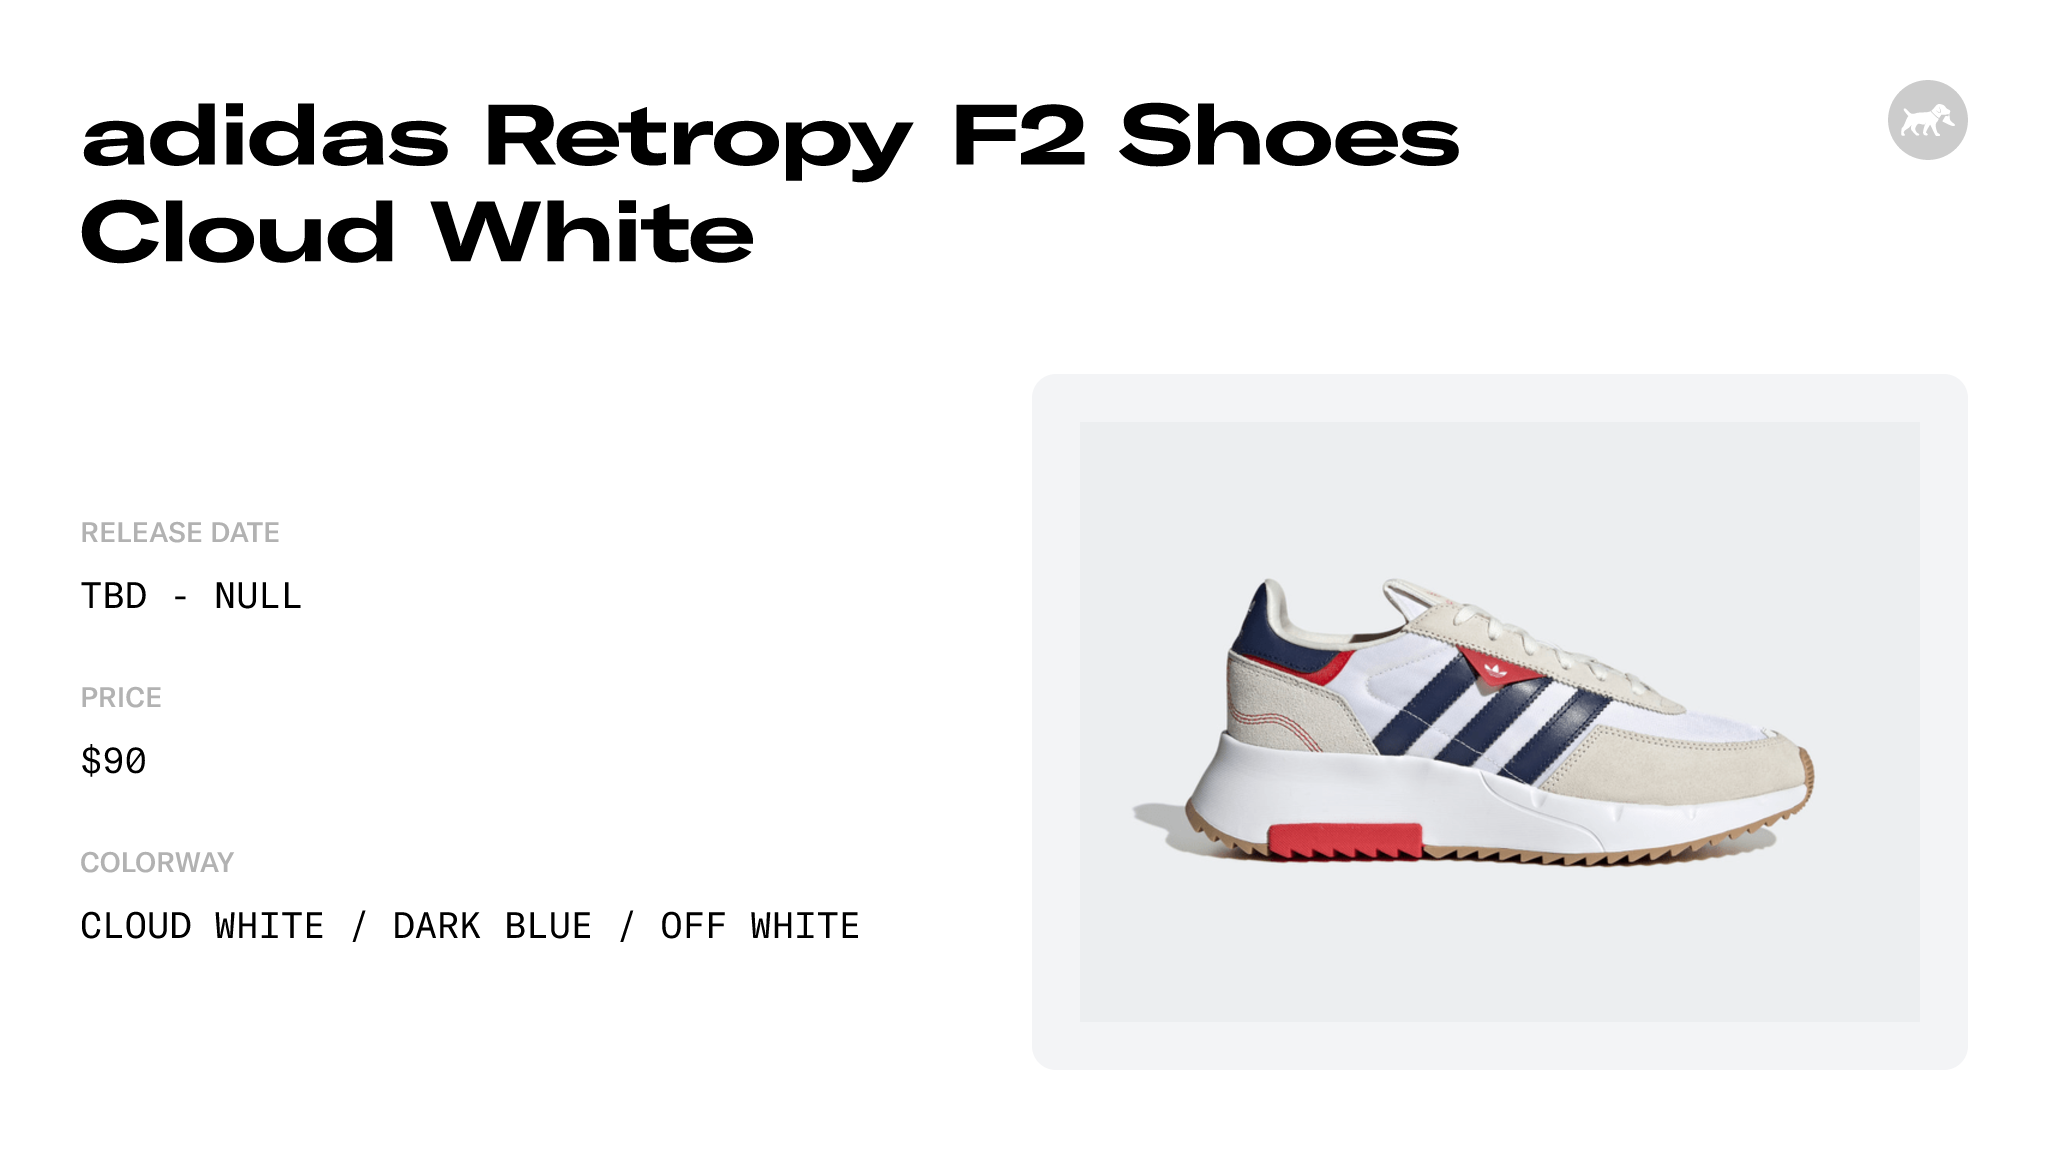 Release Raffles White F2 - Shoes GW9354 Retropy adidas and Date Cloud